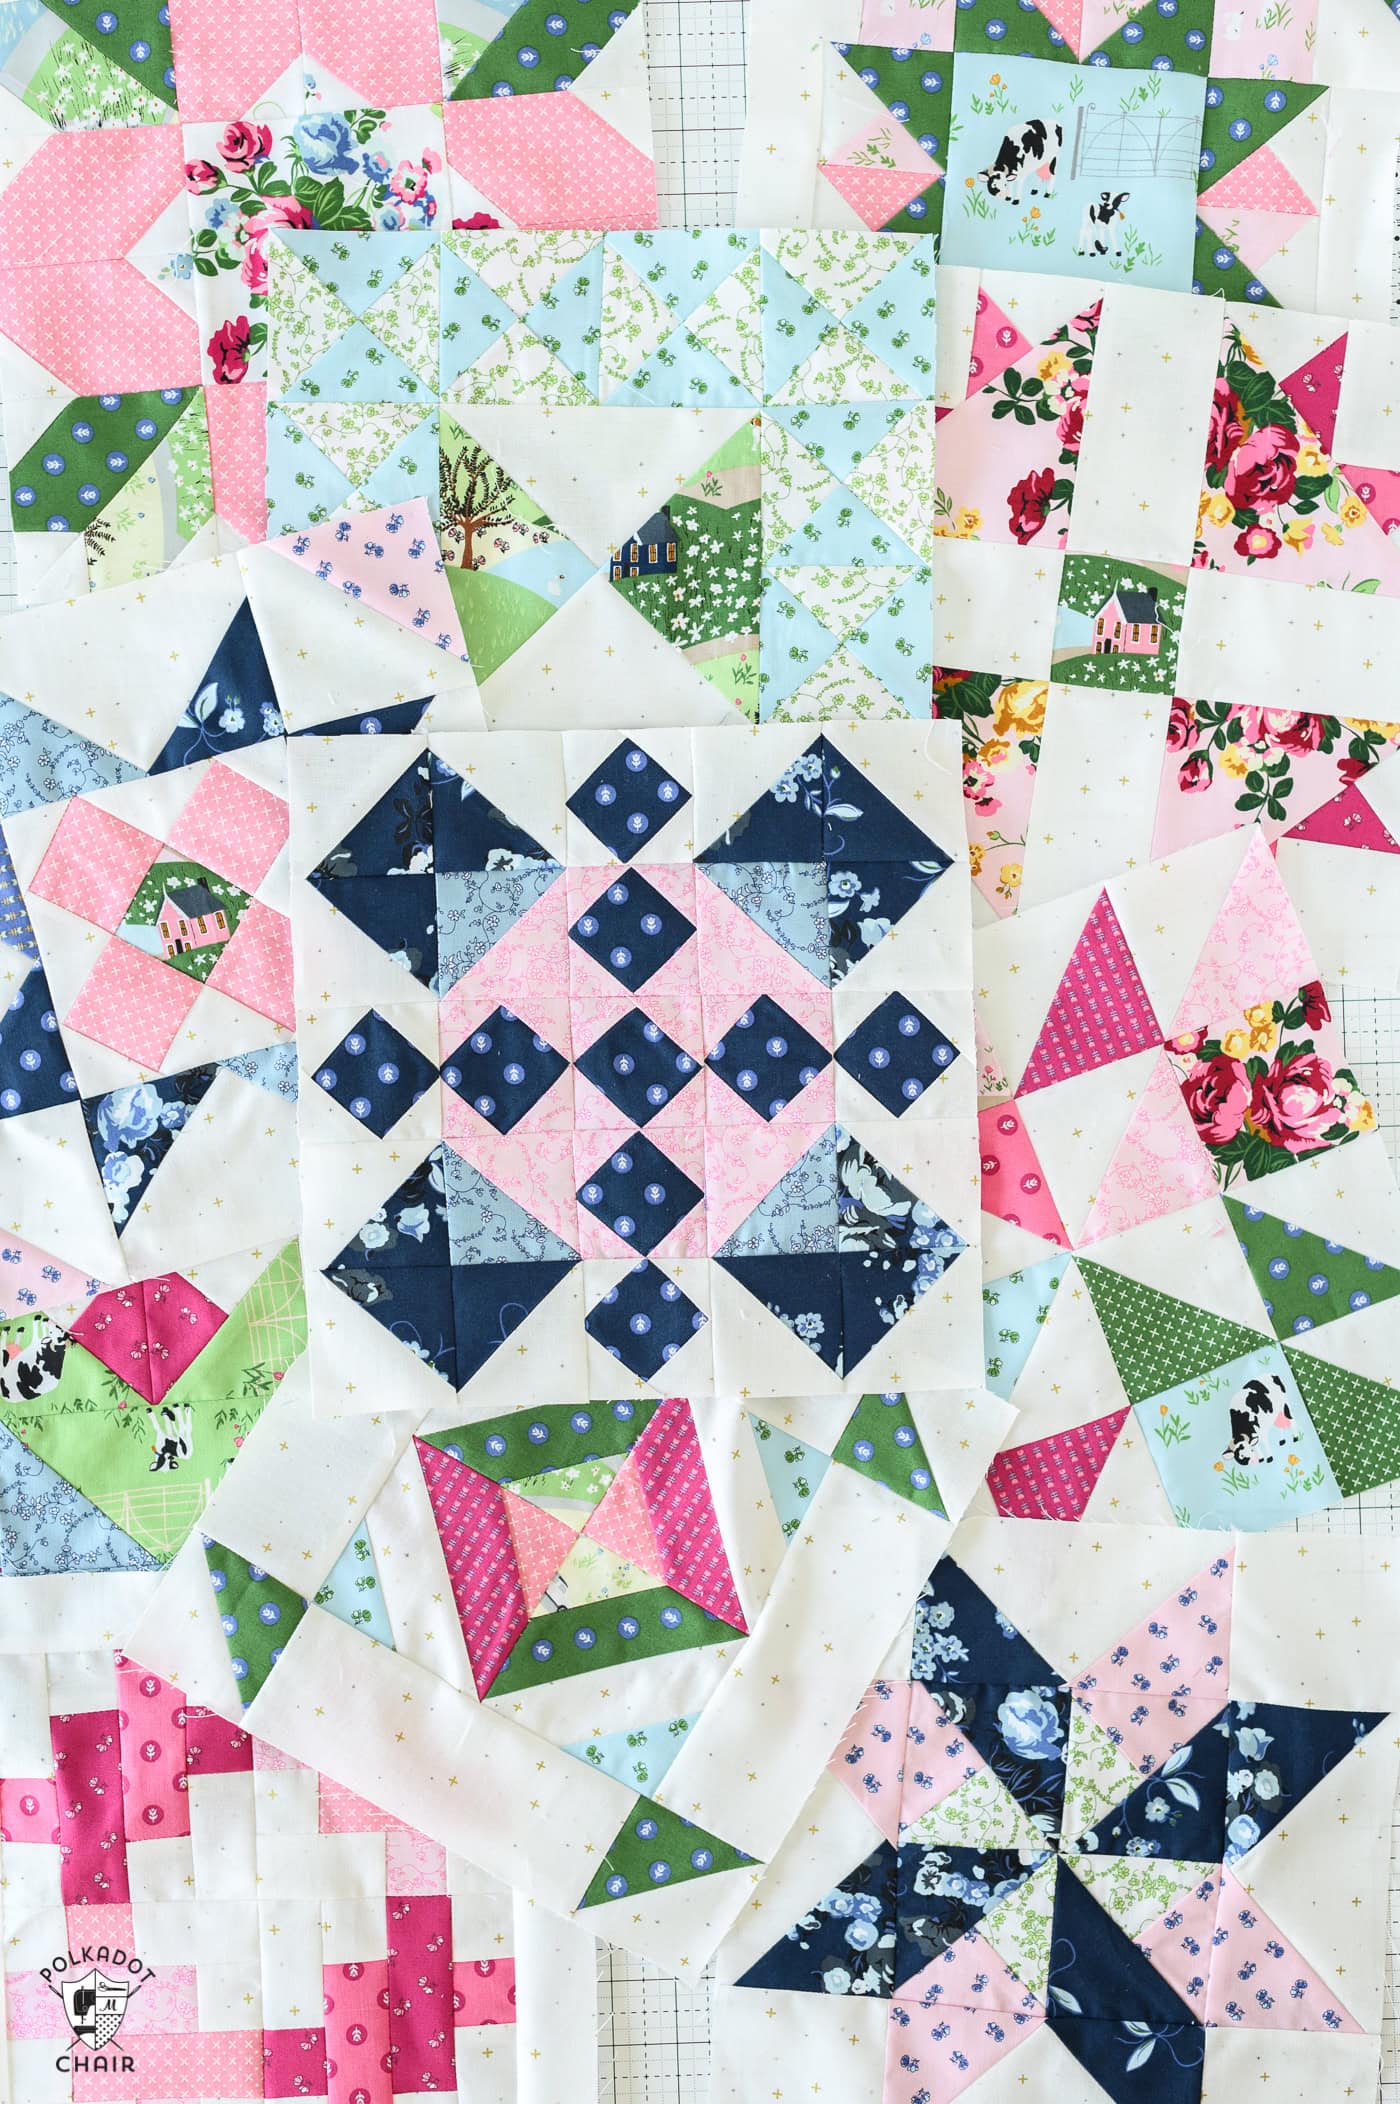 several colorful quilt blocks scattered on white table